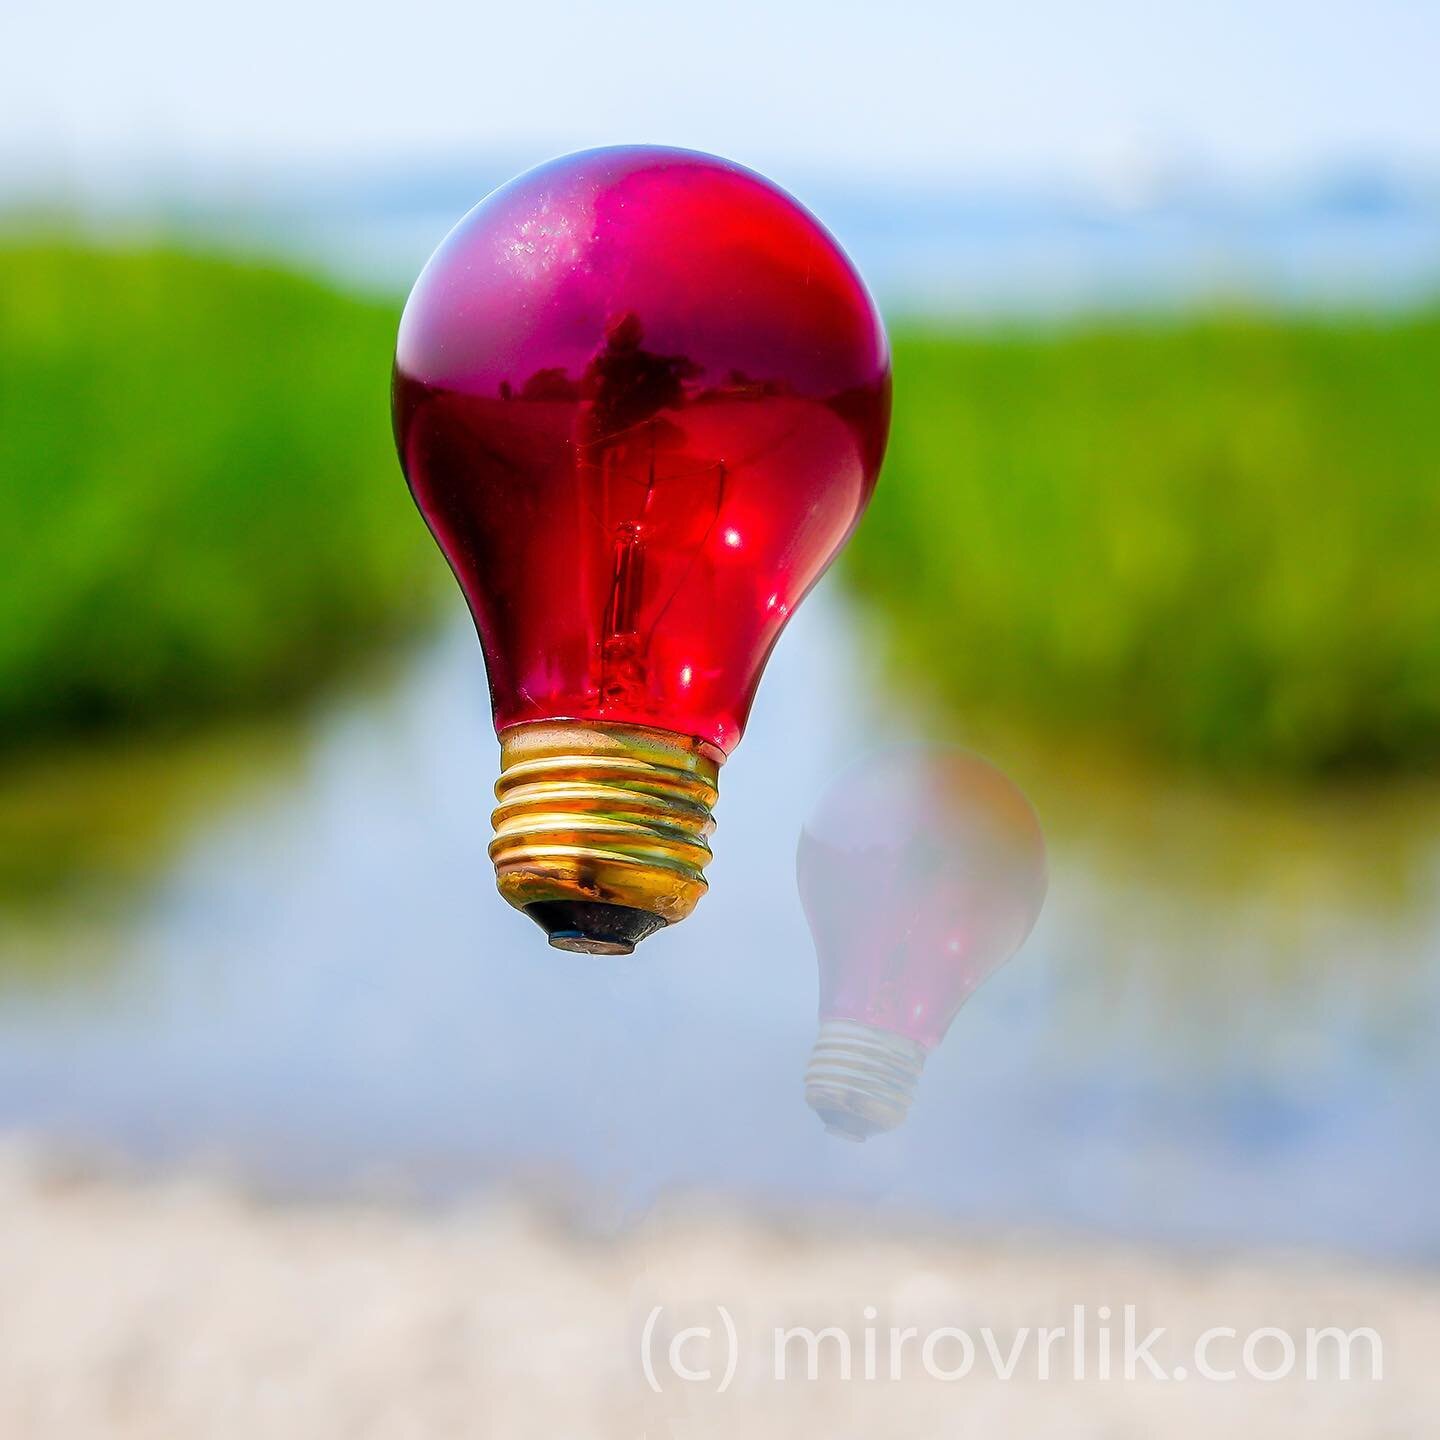 Weekend is here,  time for bringing ideas 💡 to reality 🙂 @mirovrlik #simplicity #digitalart #ilusion #affinityphoto #redbulb #abstractart #globalwarming #globalwarning #nature #earthfocus #bulb #reflections  #photographer #conceptualphotography #co